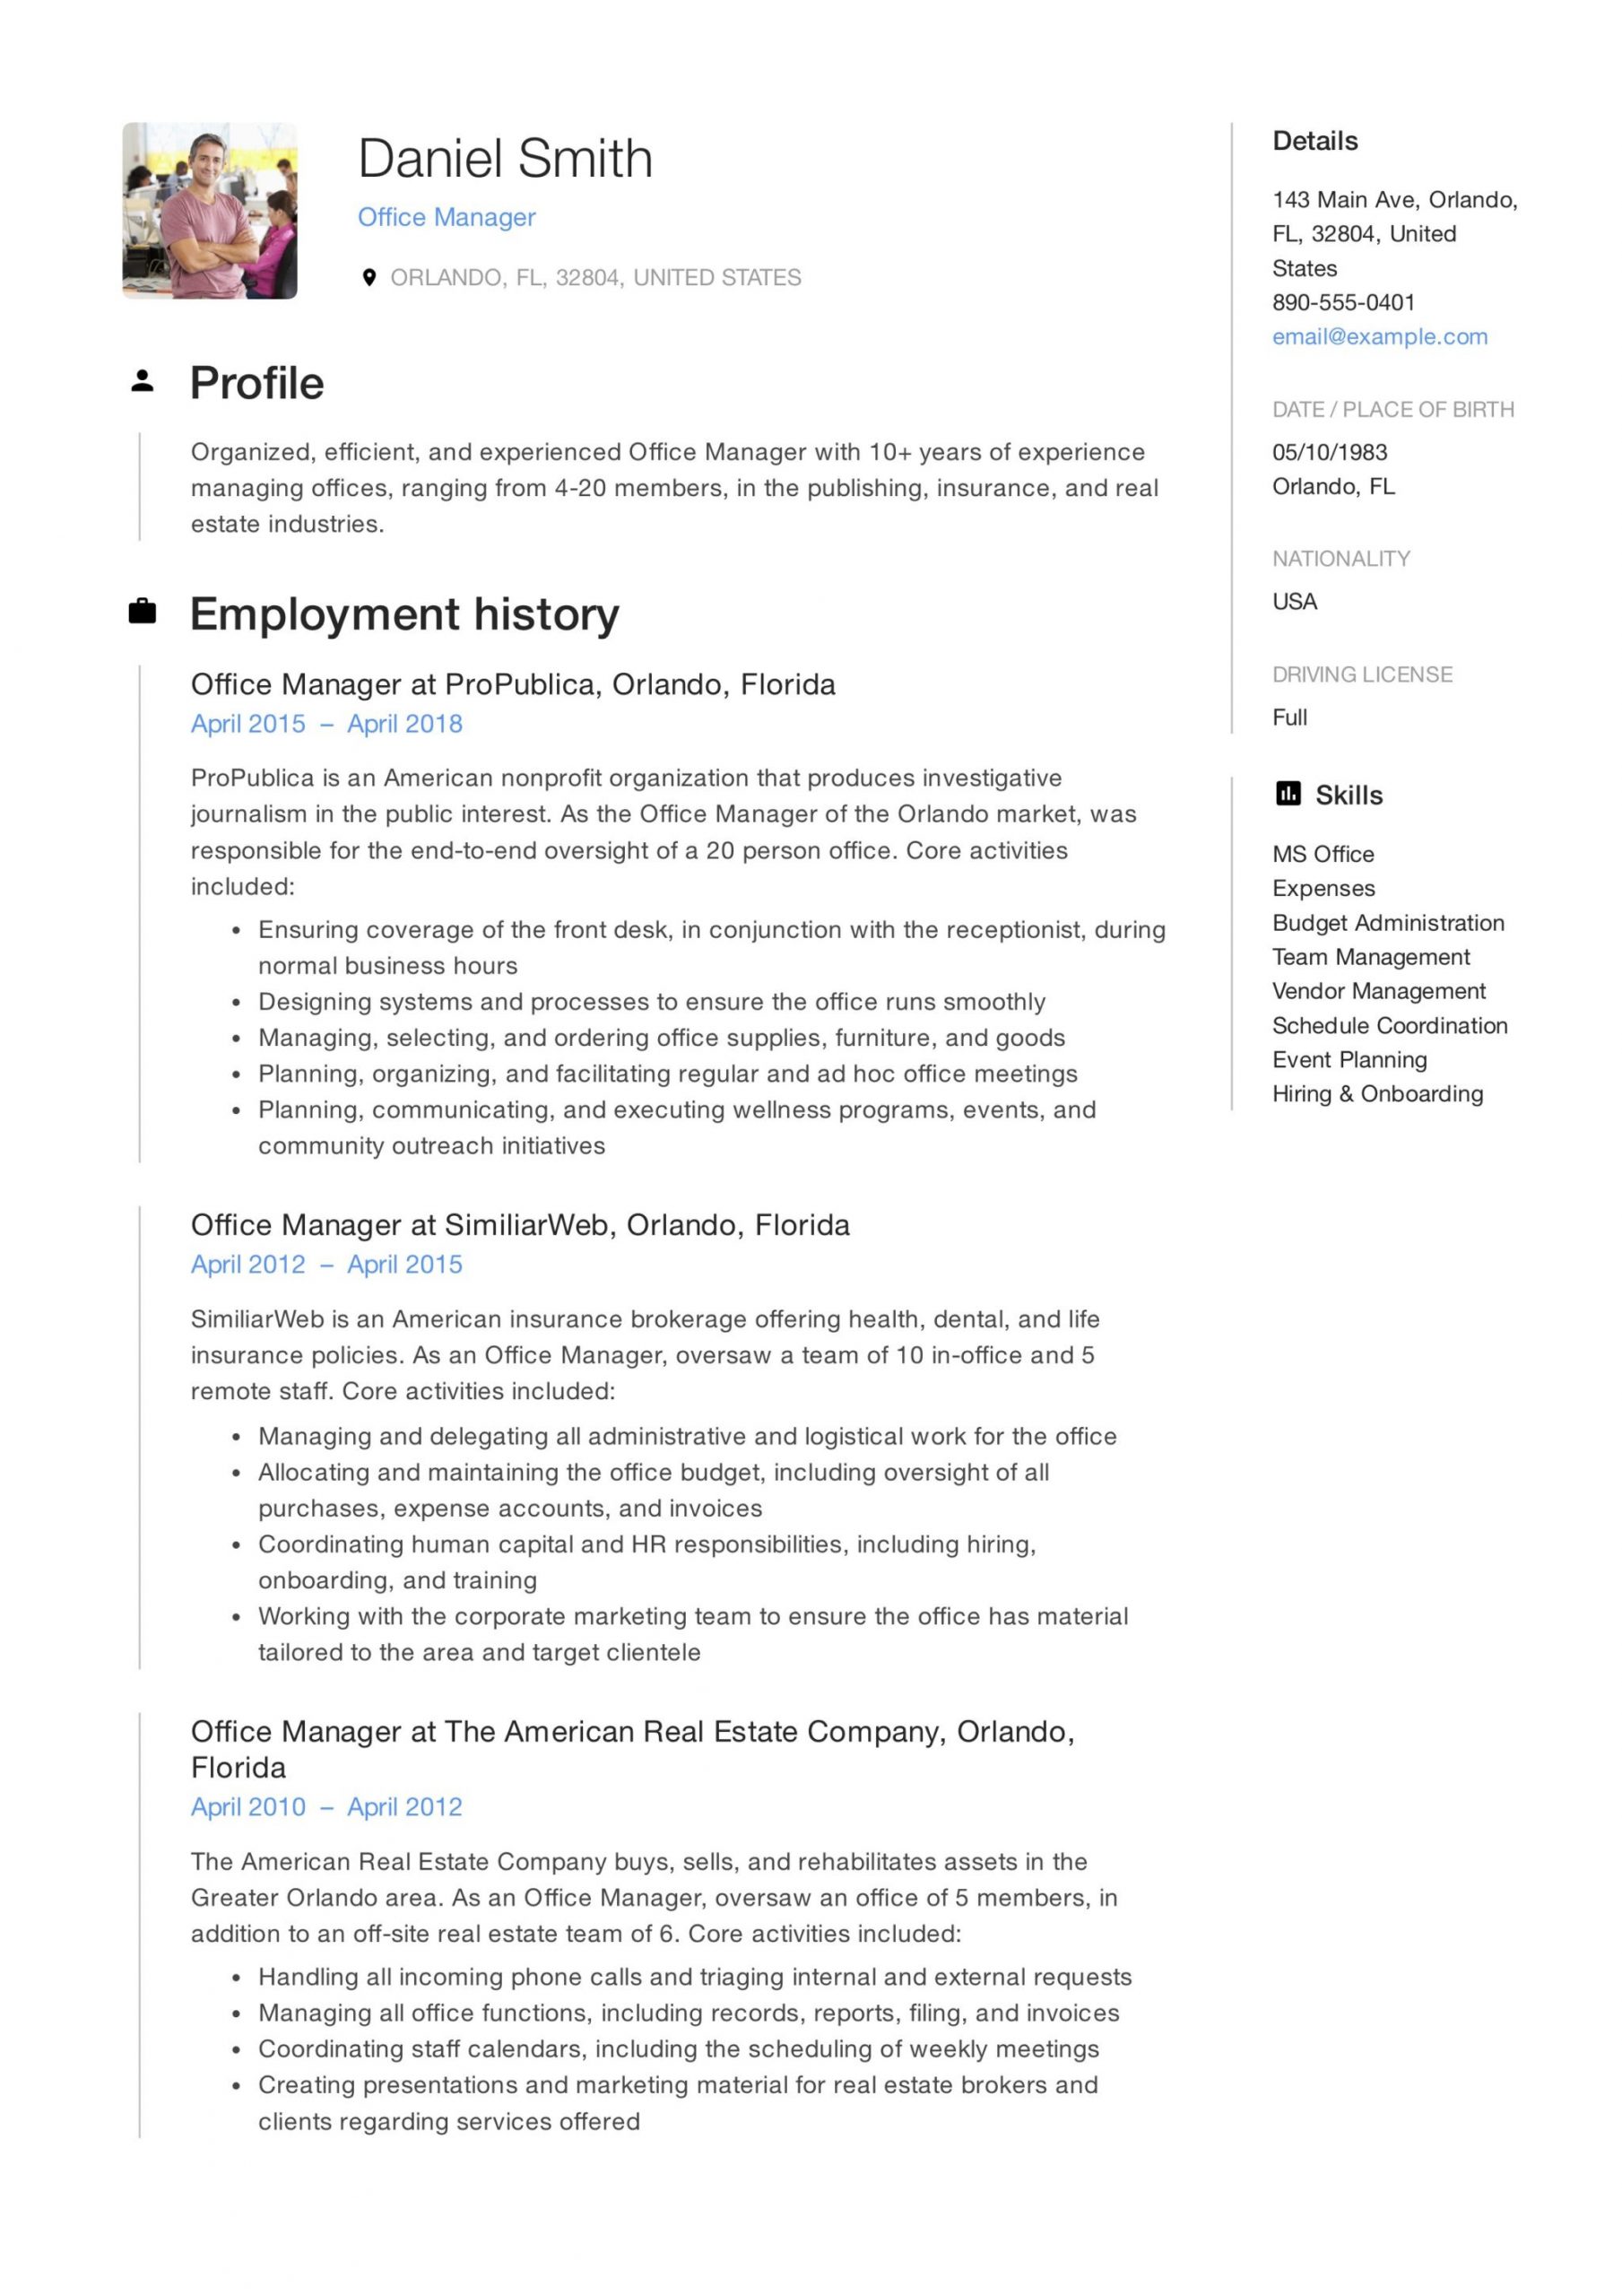 Sample Resume with Onsite Work Experience Office Manager Resume & Guide 12 Samples Pdf 2020